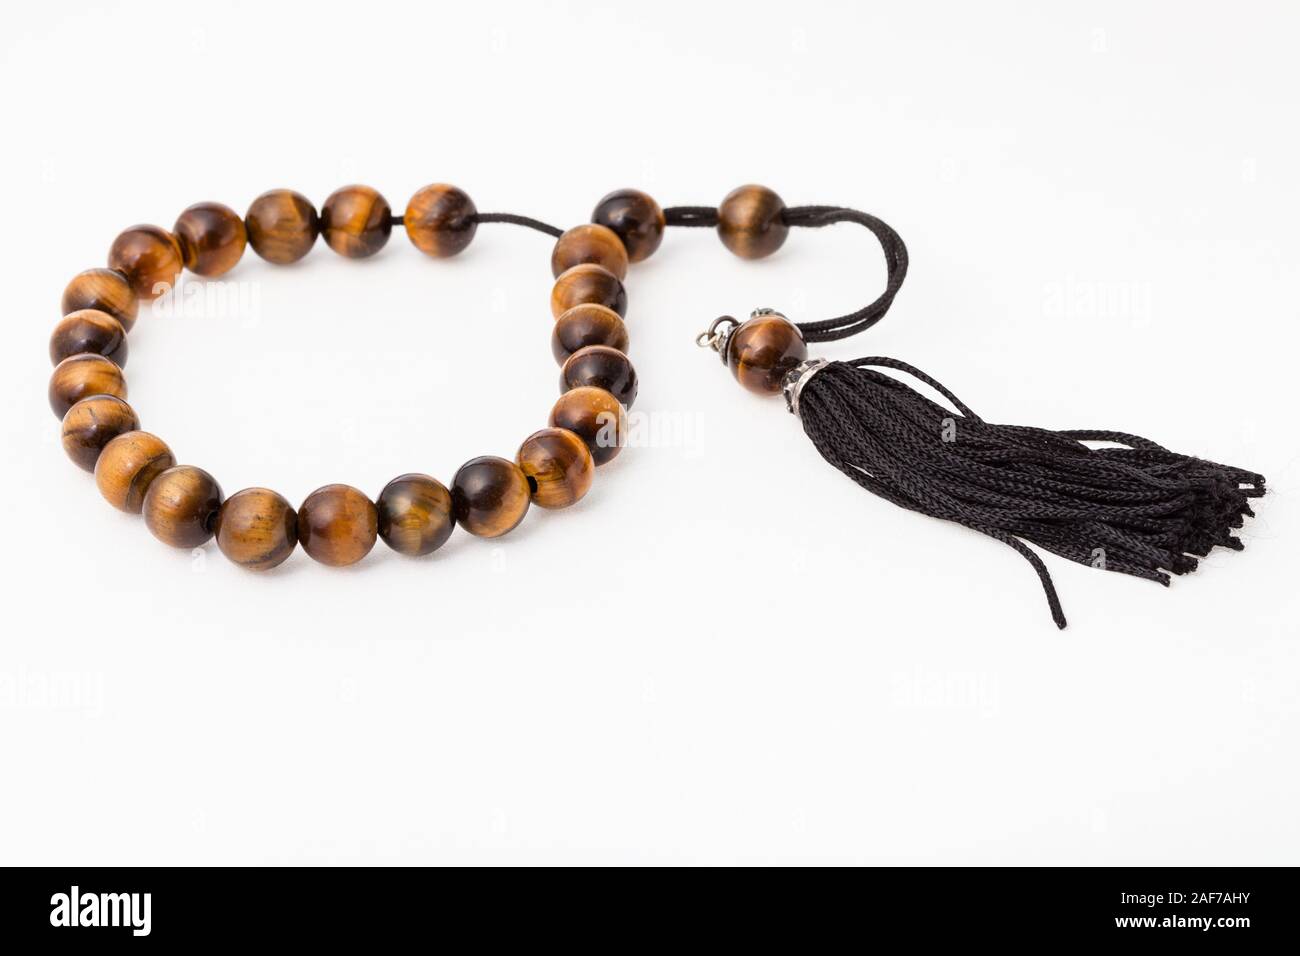 worry beads from tiger's eye gemstones on white paper background Stock Photo